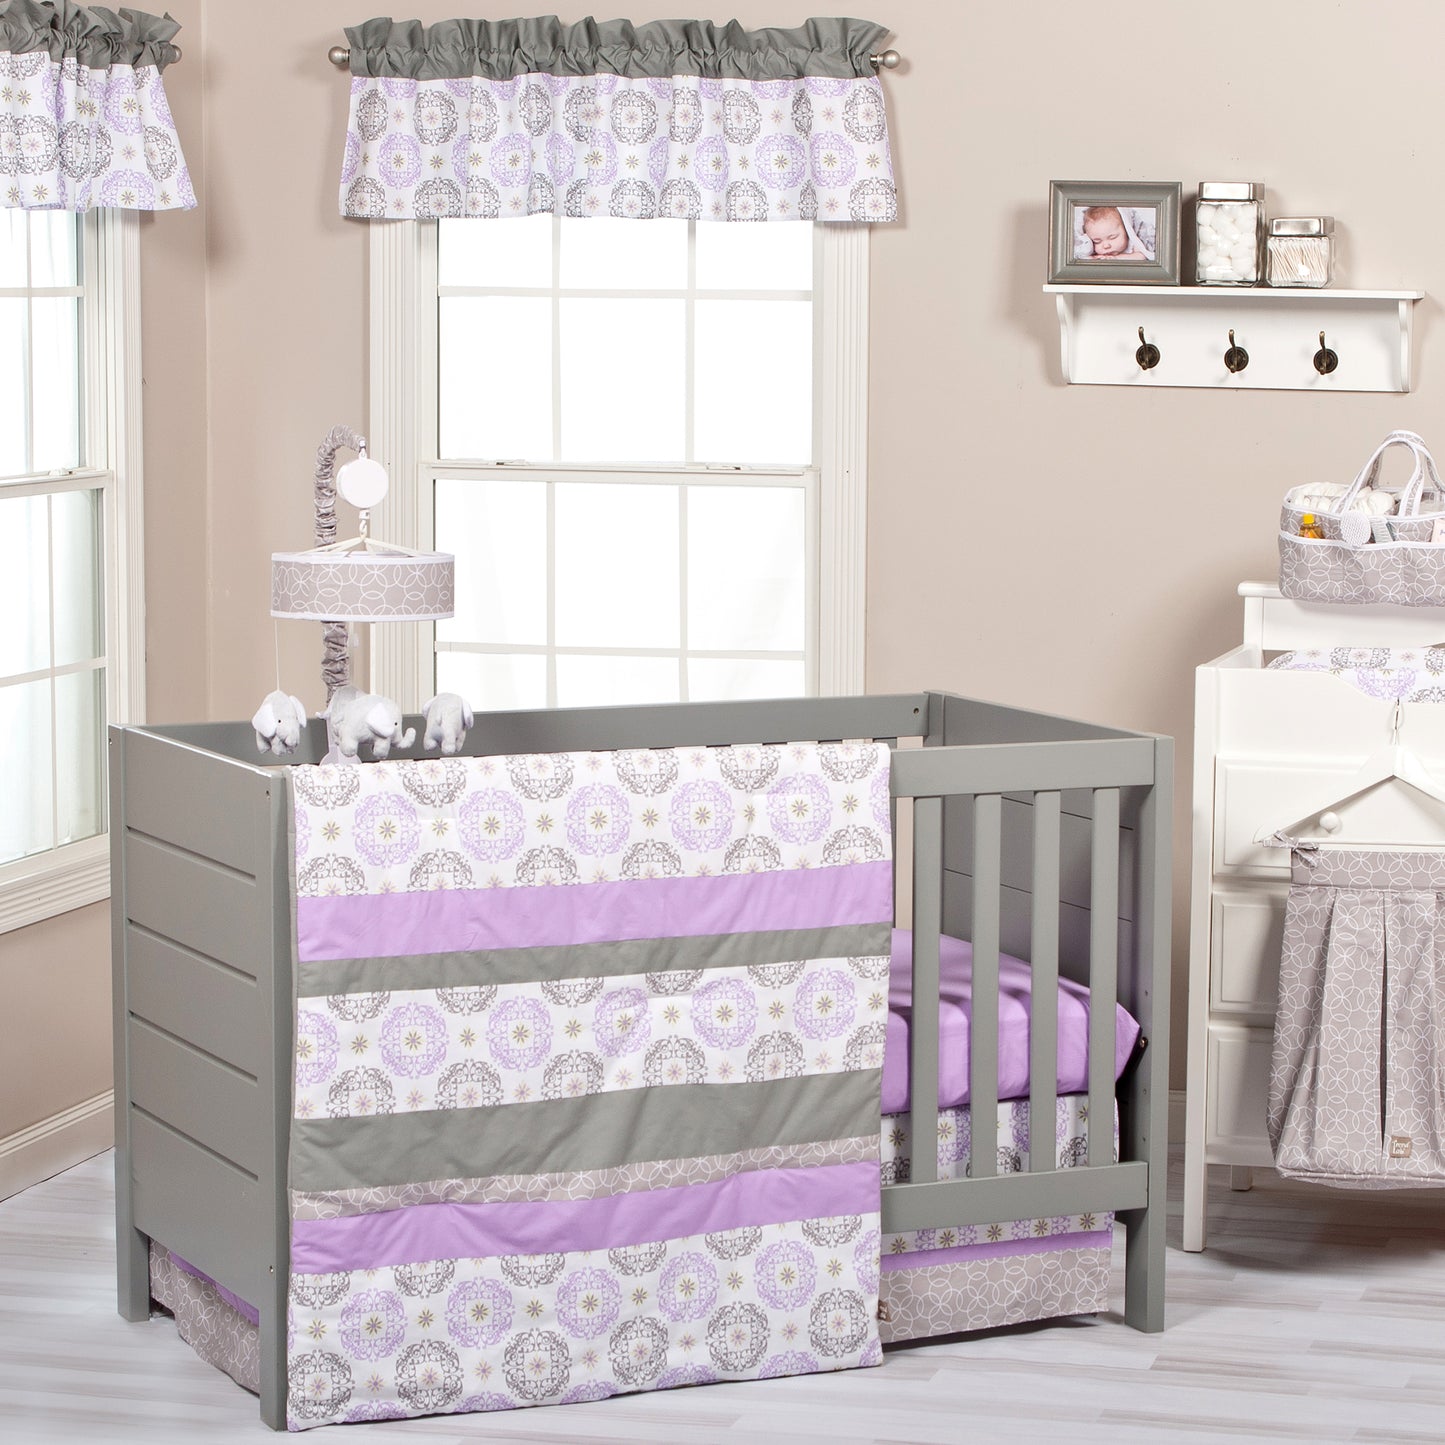 Florence 3 Piece Crib Bedding Set in stylized room